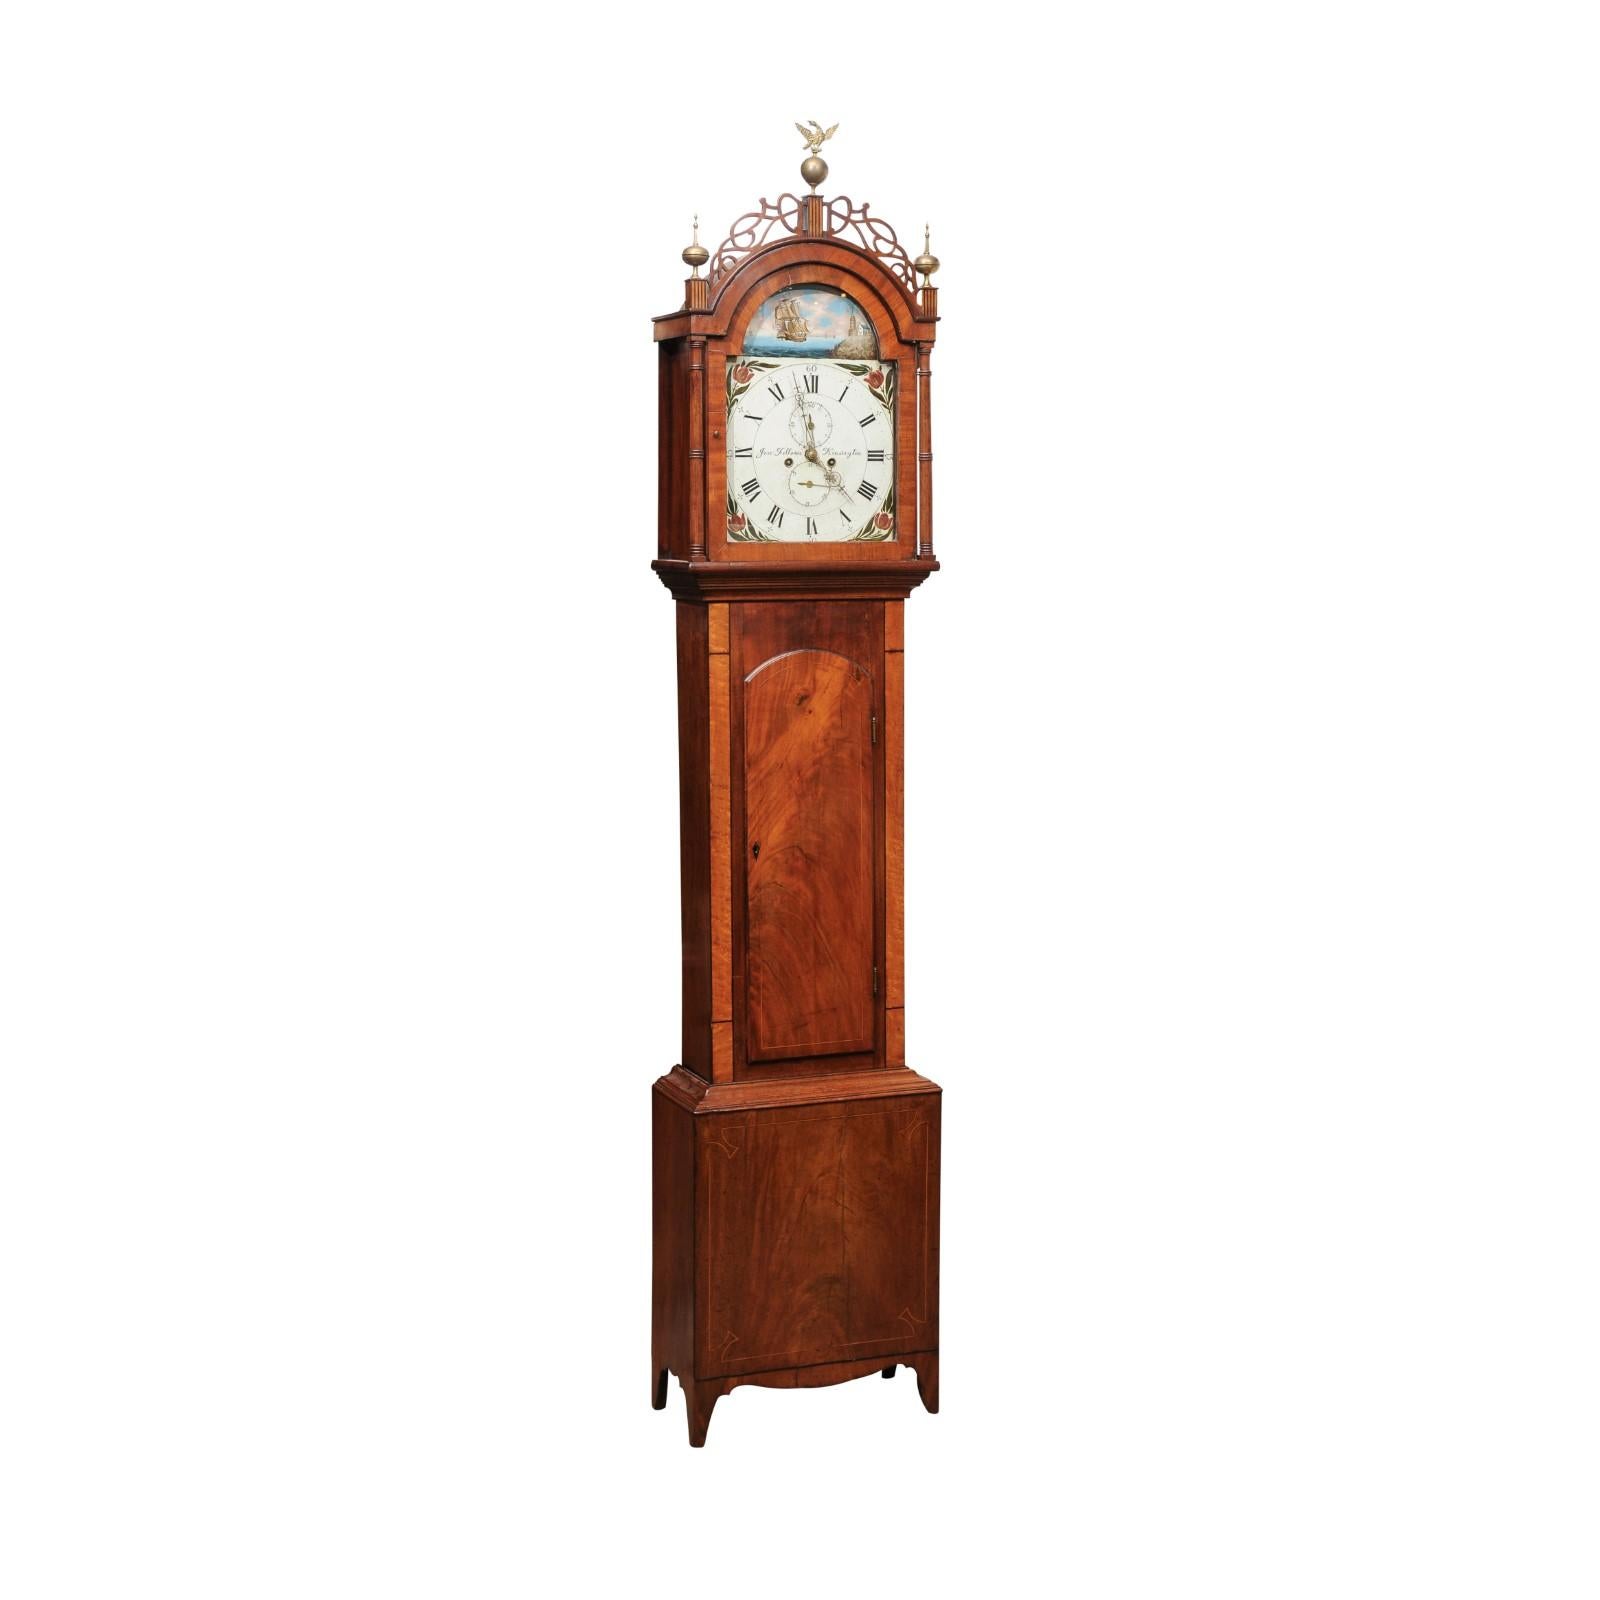 American Federal Tallcase Clock in Mahogany with Pierced Crest, Brass Finials & Painted Face, Signed “Jere Fellows Kinsington” early 19th Century